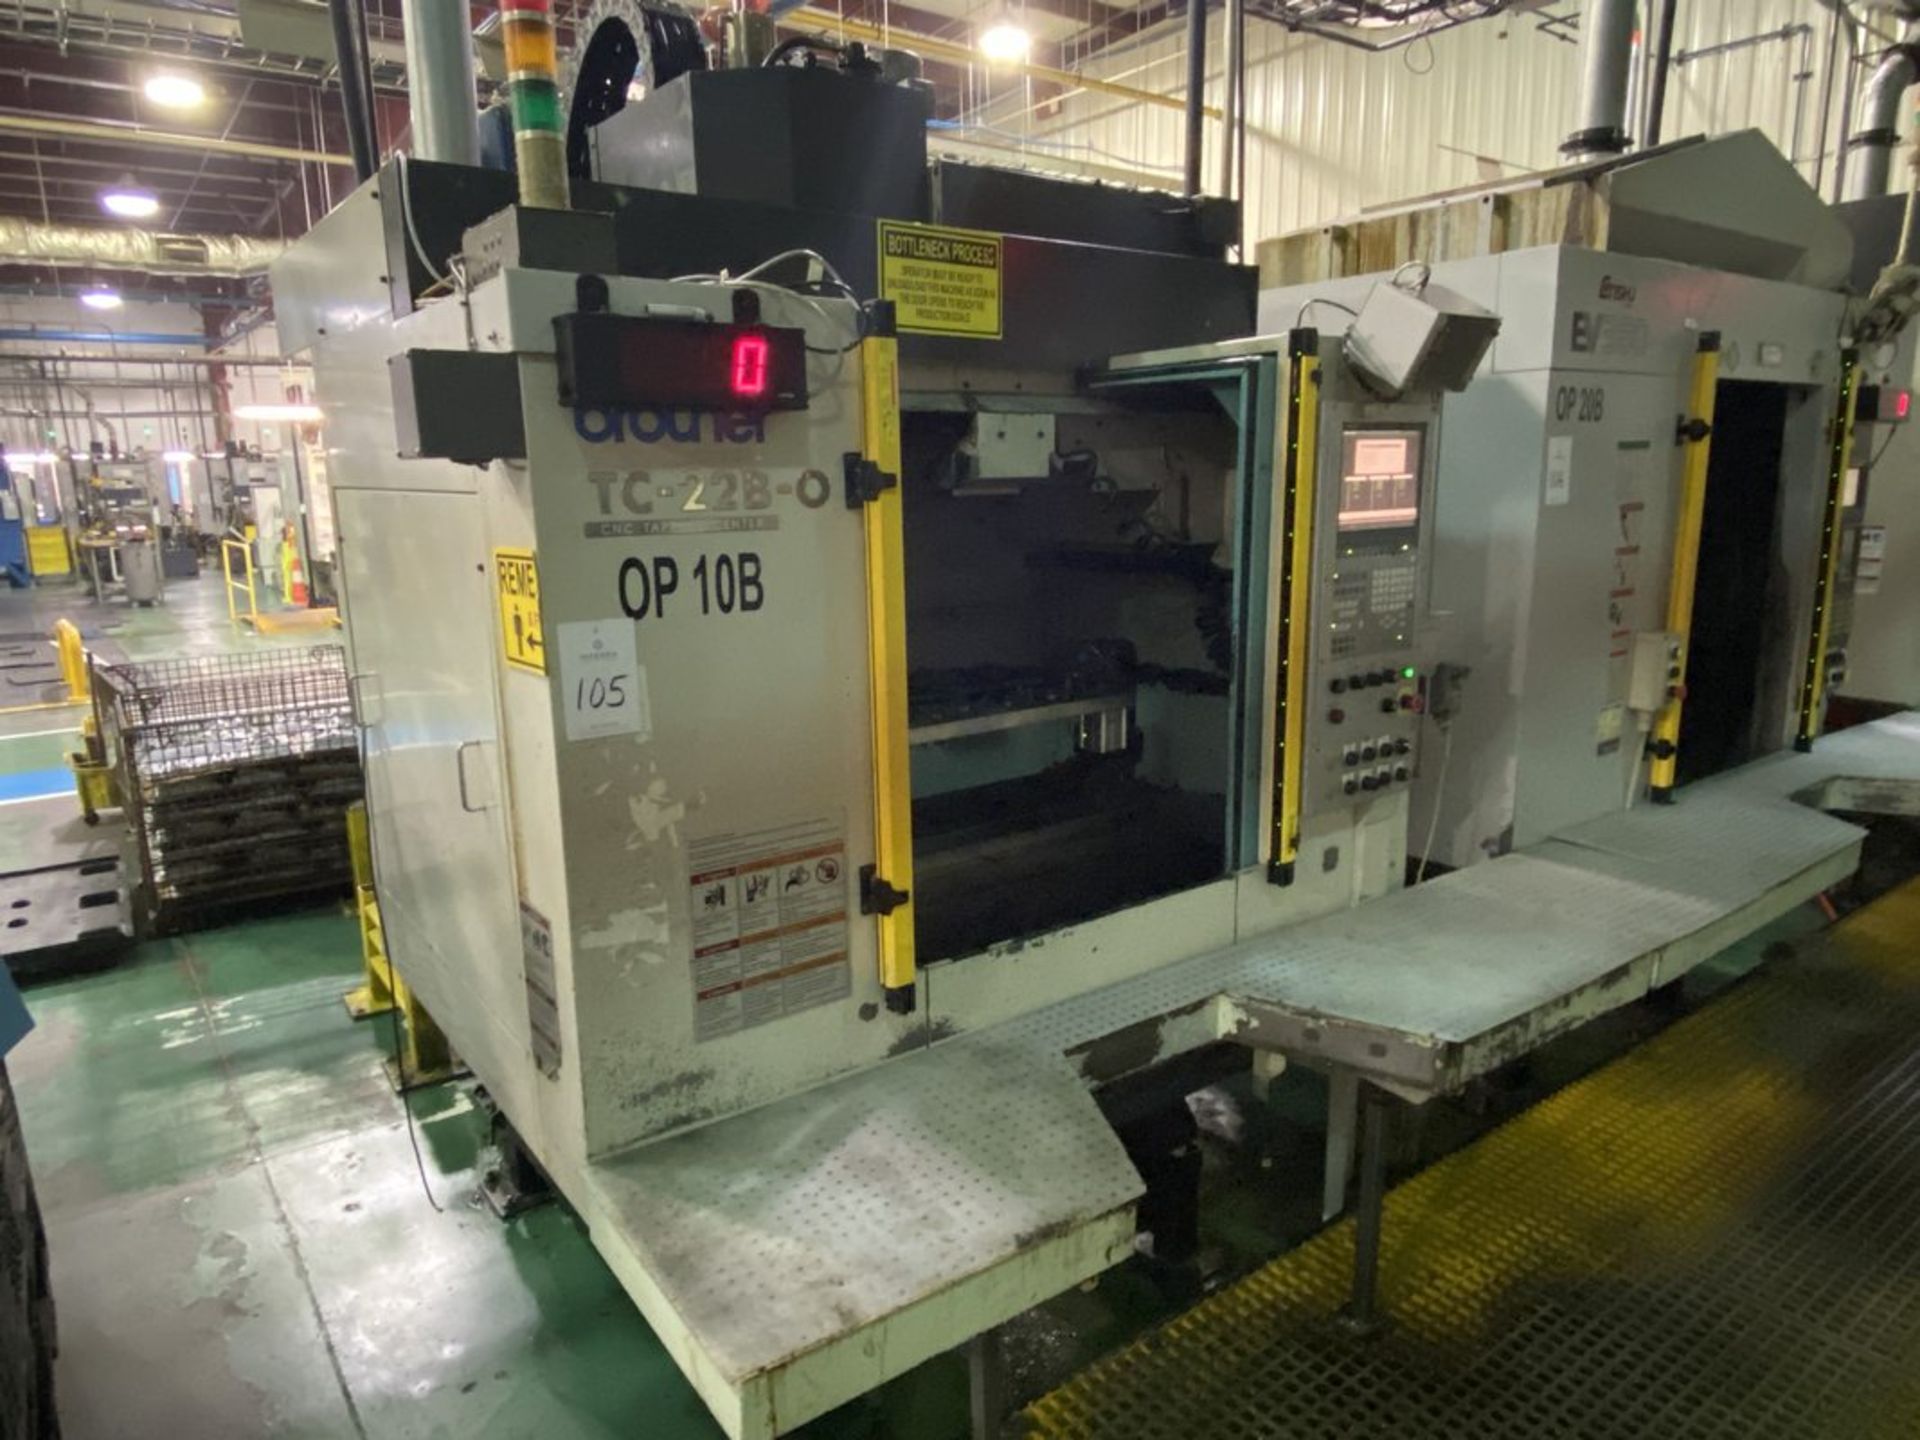 Brother TC-22B-0 4-Axis CNC Tapping Center